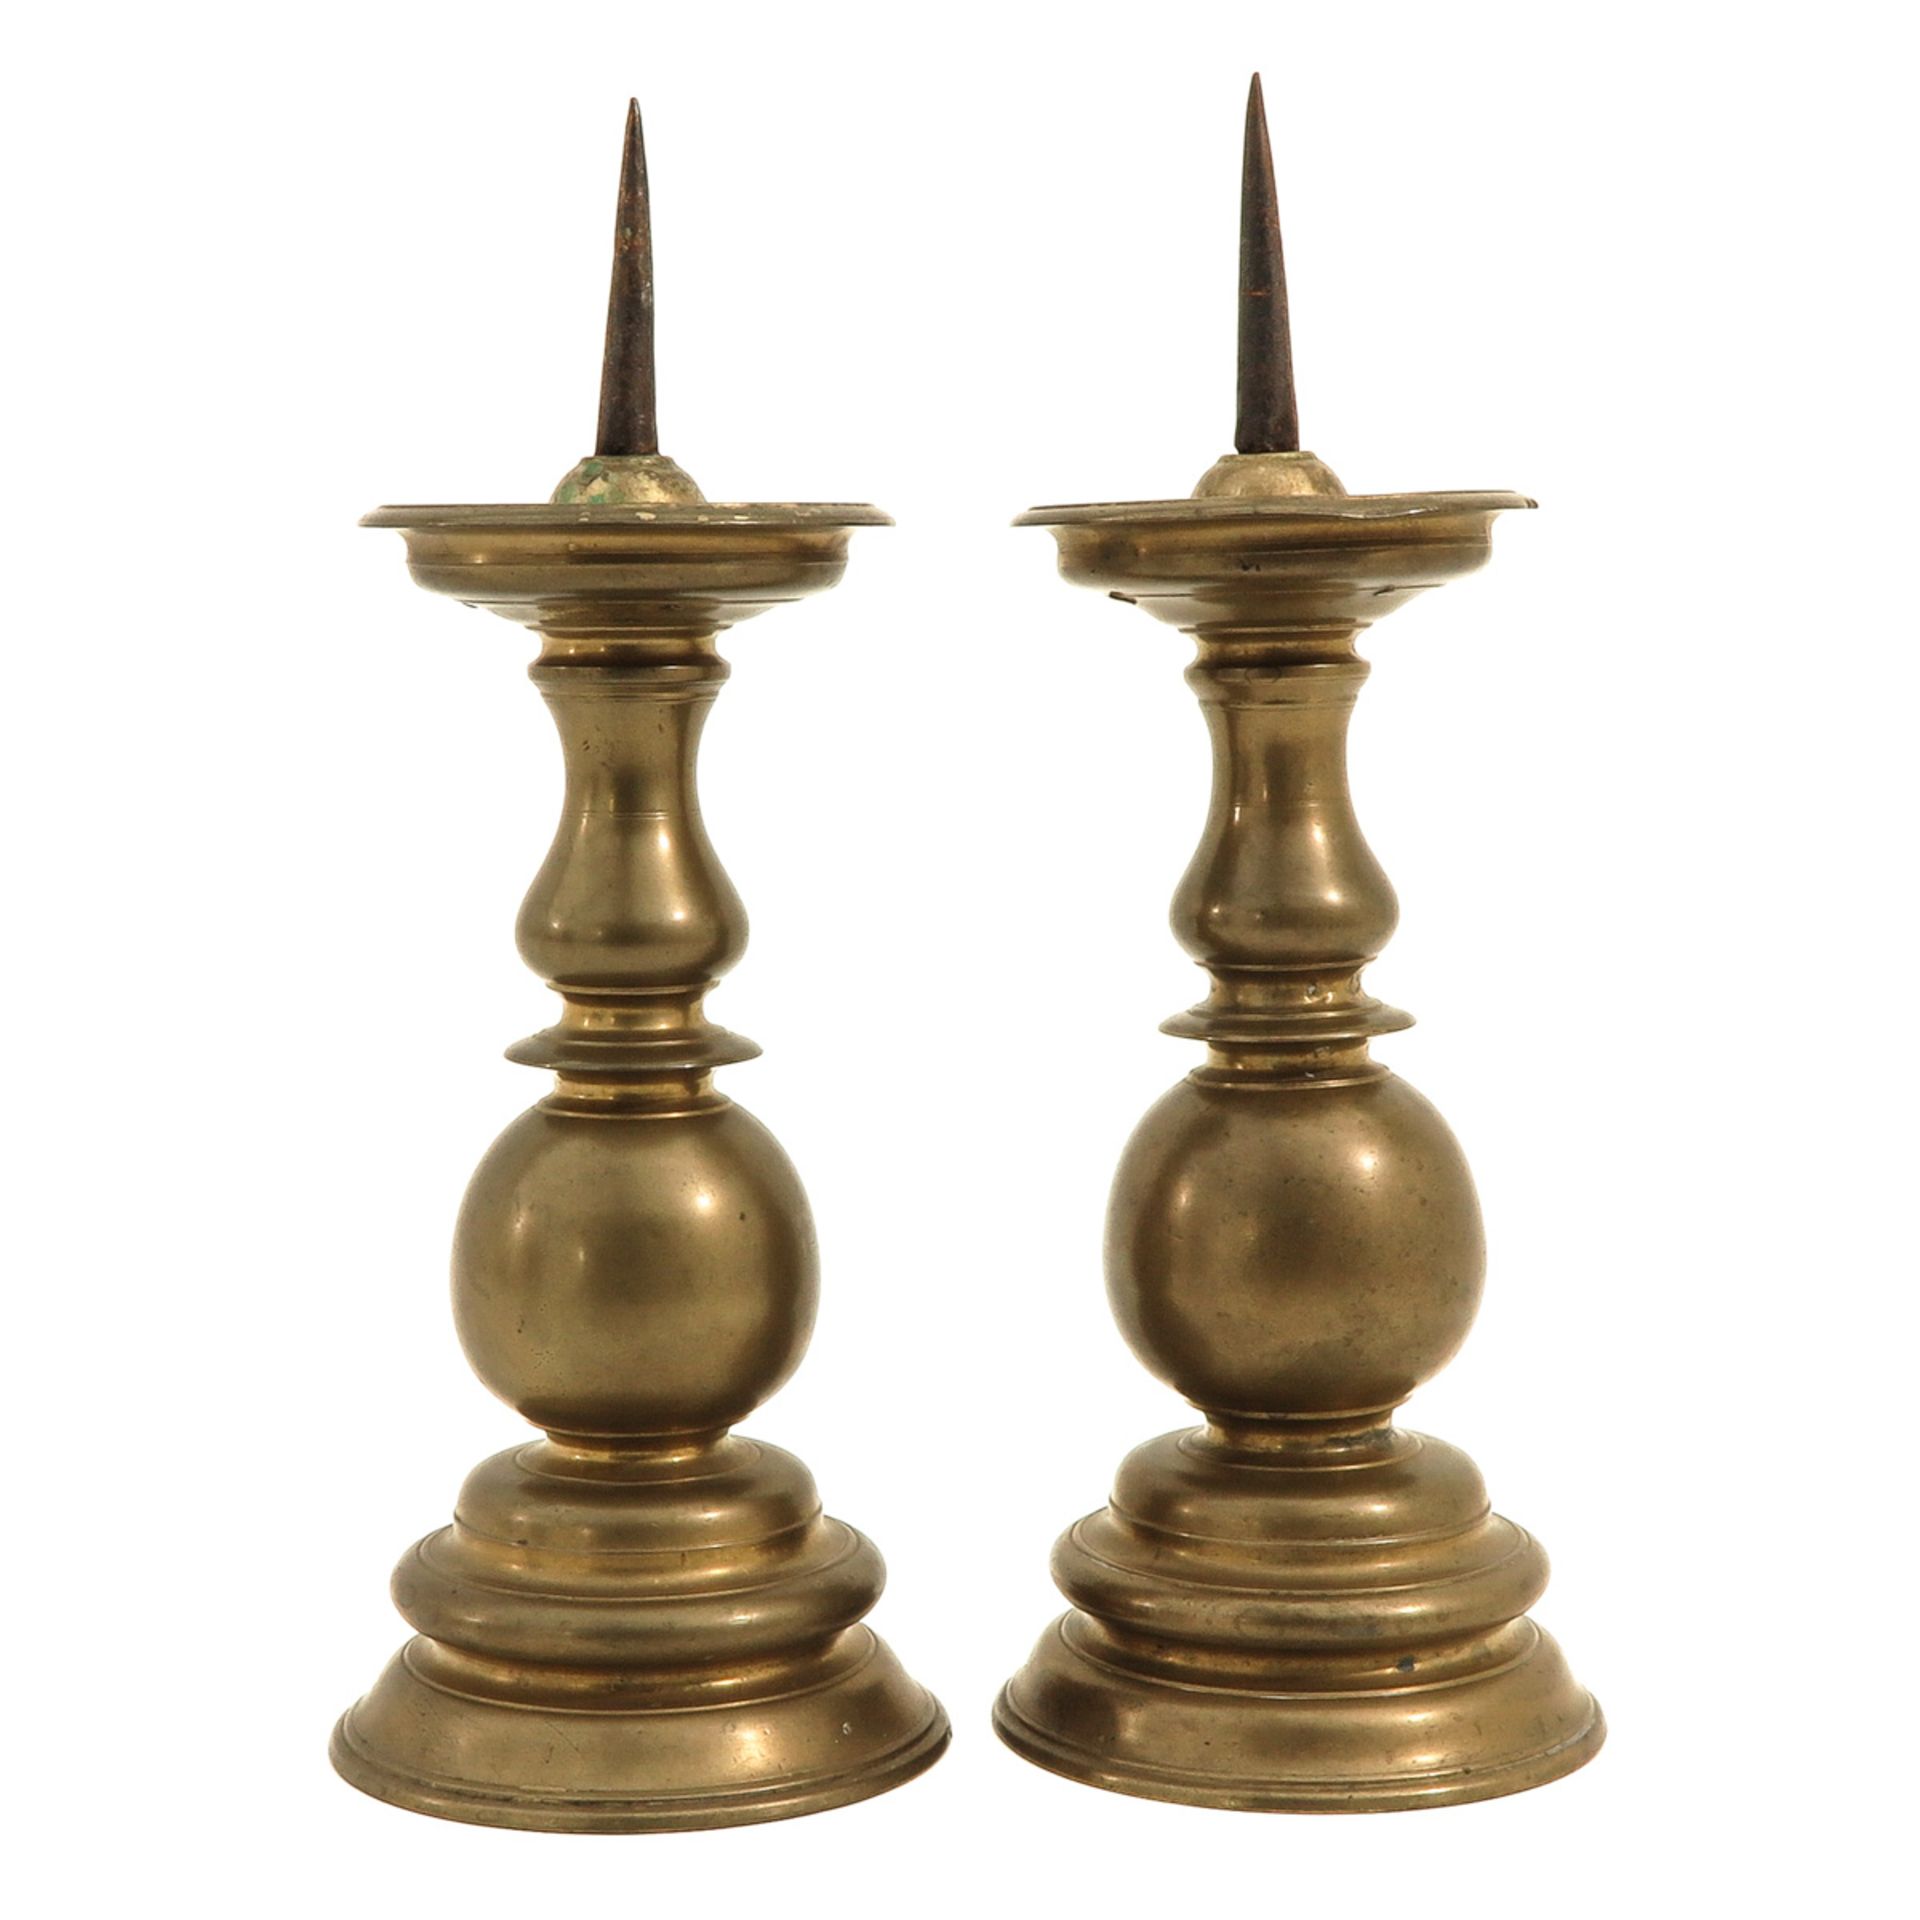 A Pair of 16th Century Candlesticks - Image 2 of 8